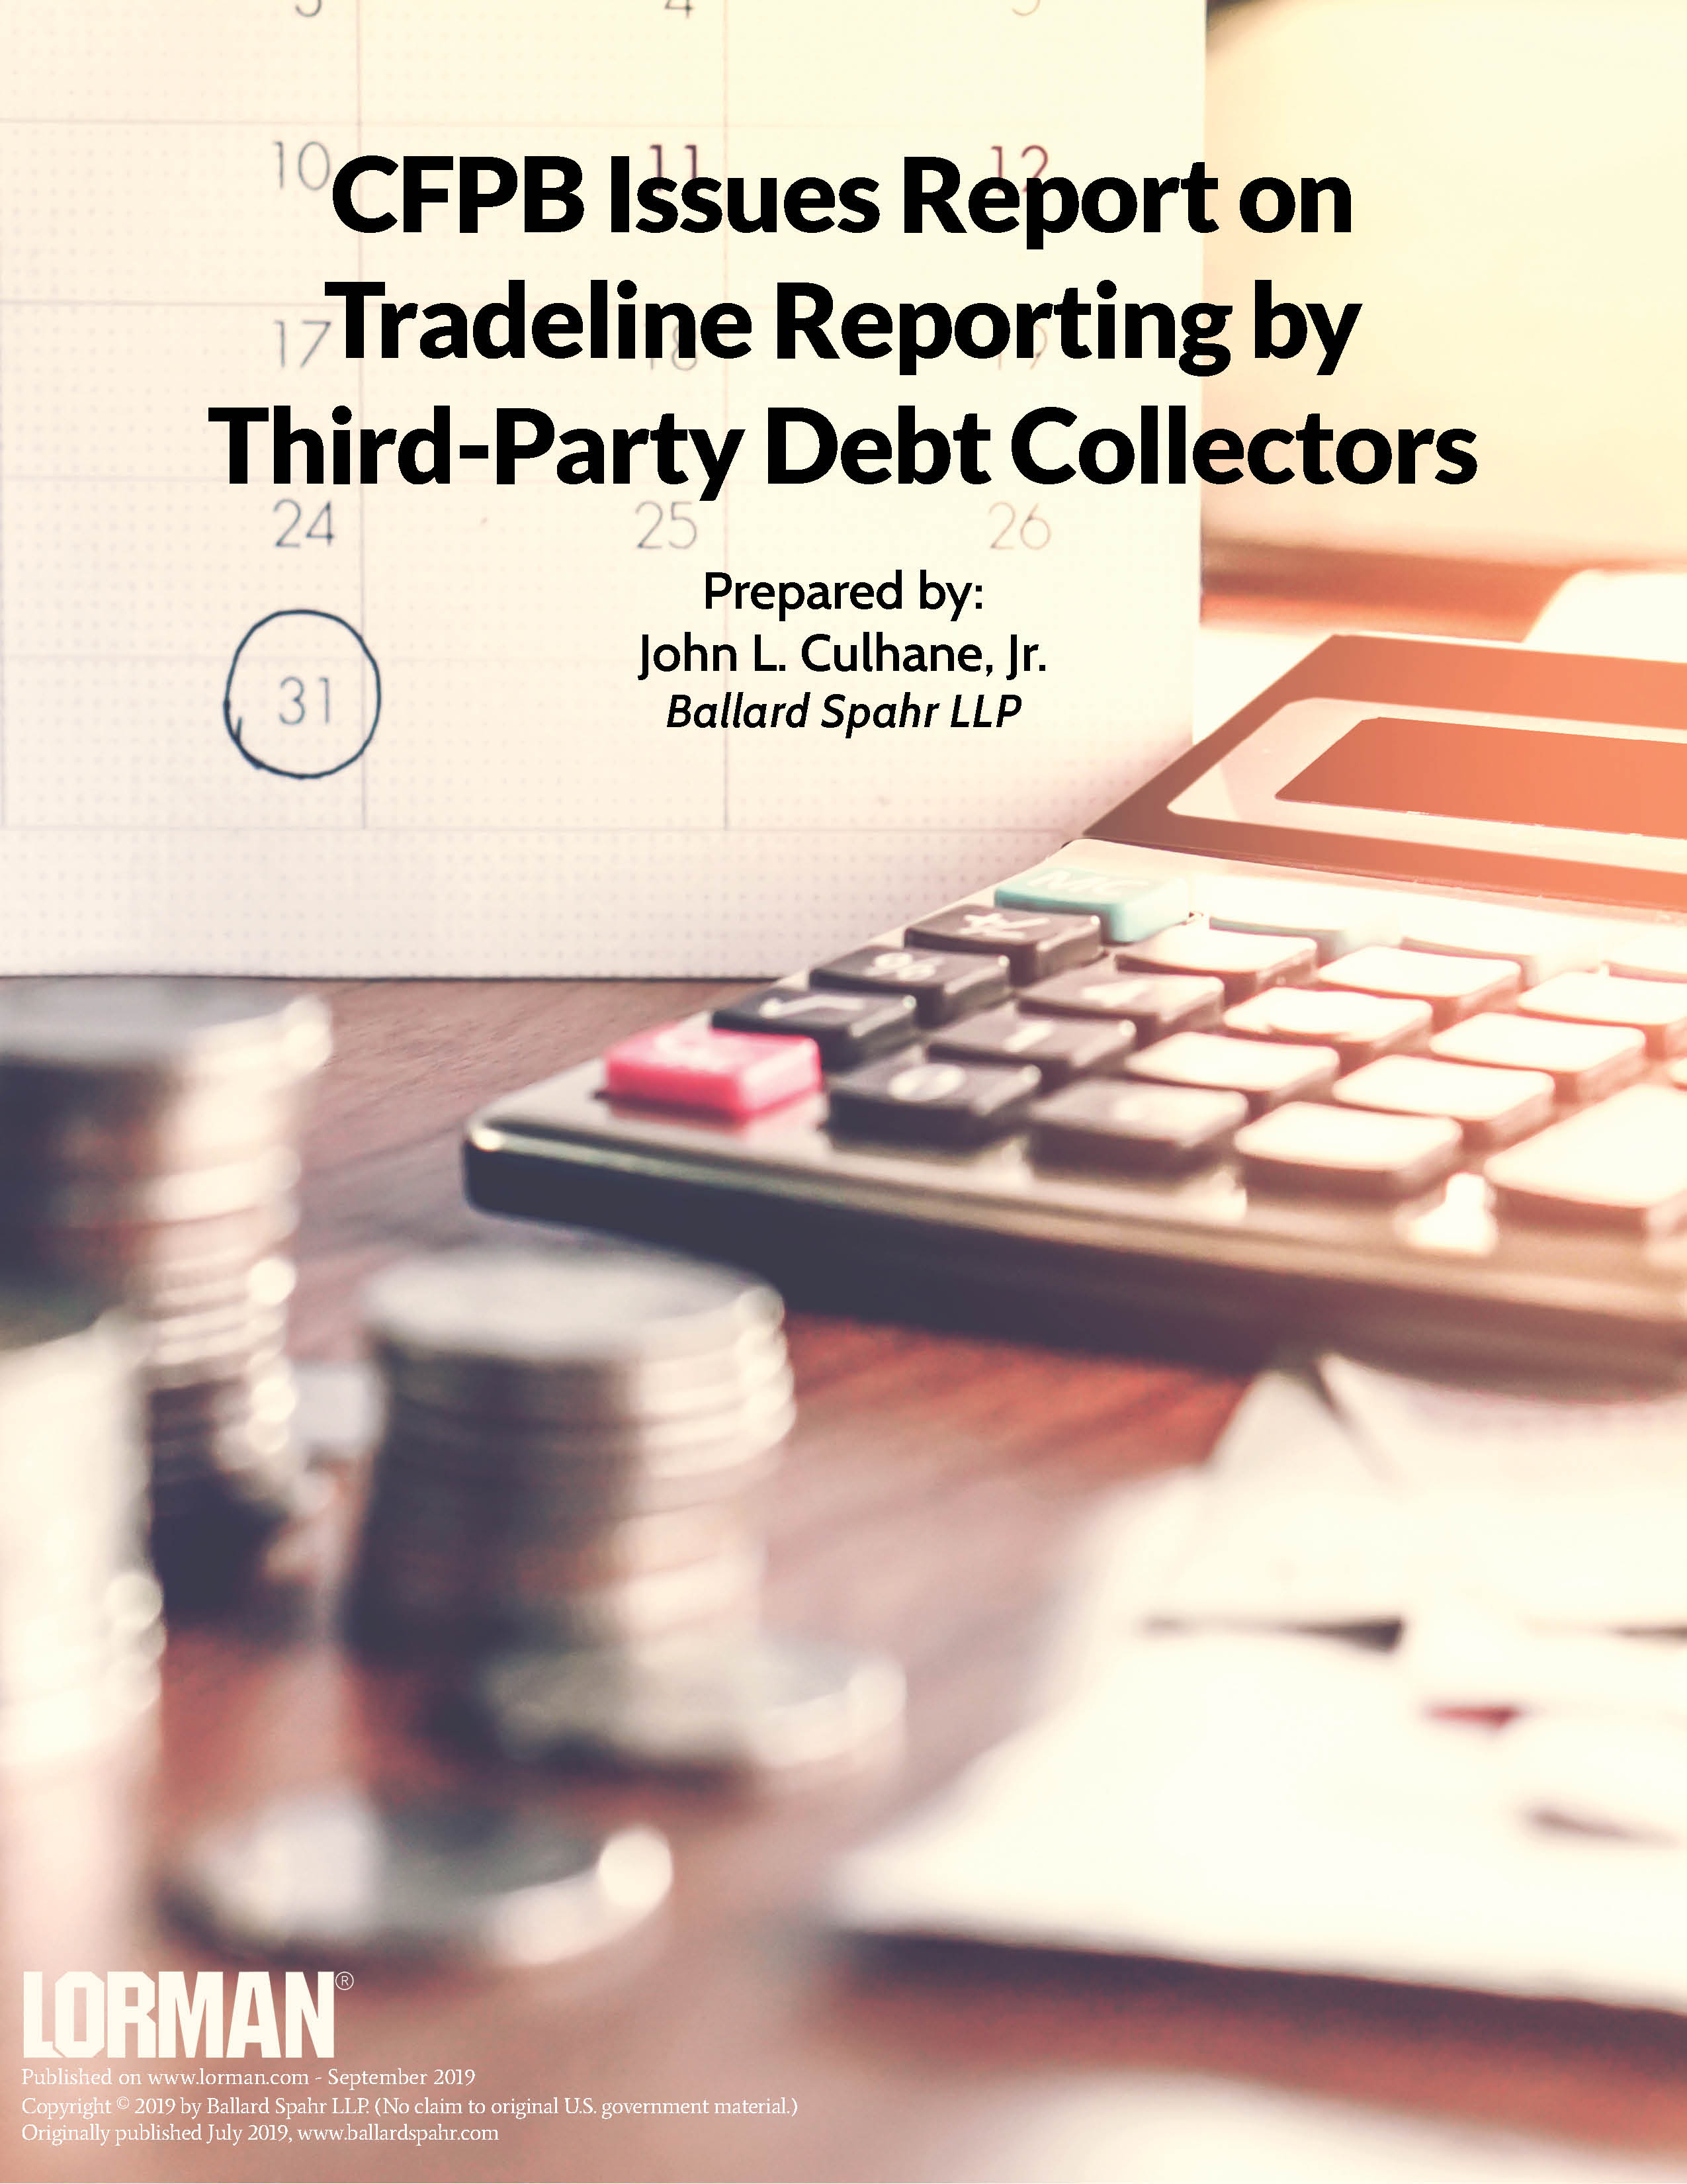 CFPB Issues Report on Tradeline Reporting by Third-Party Debt Collectors